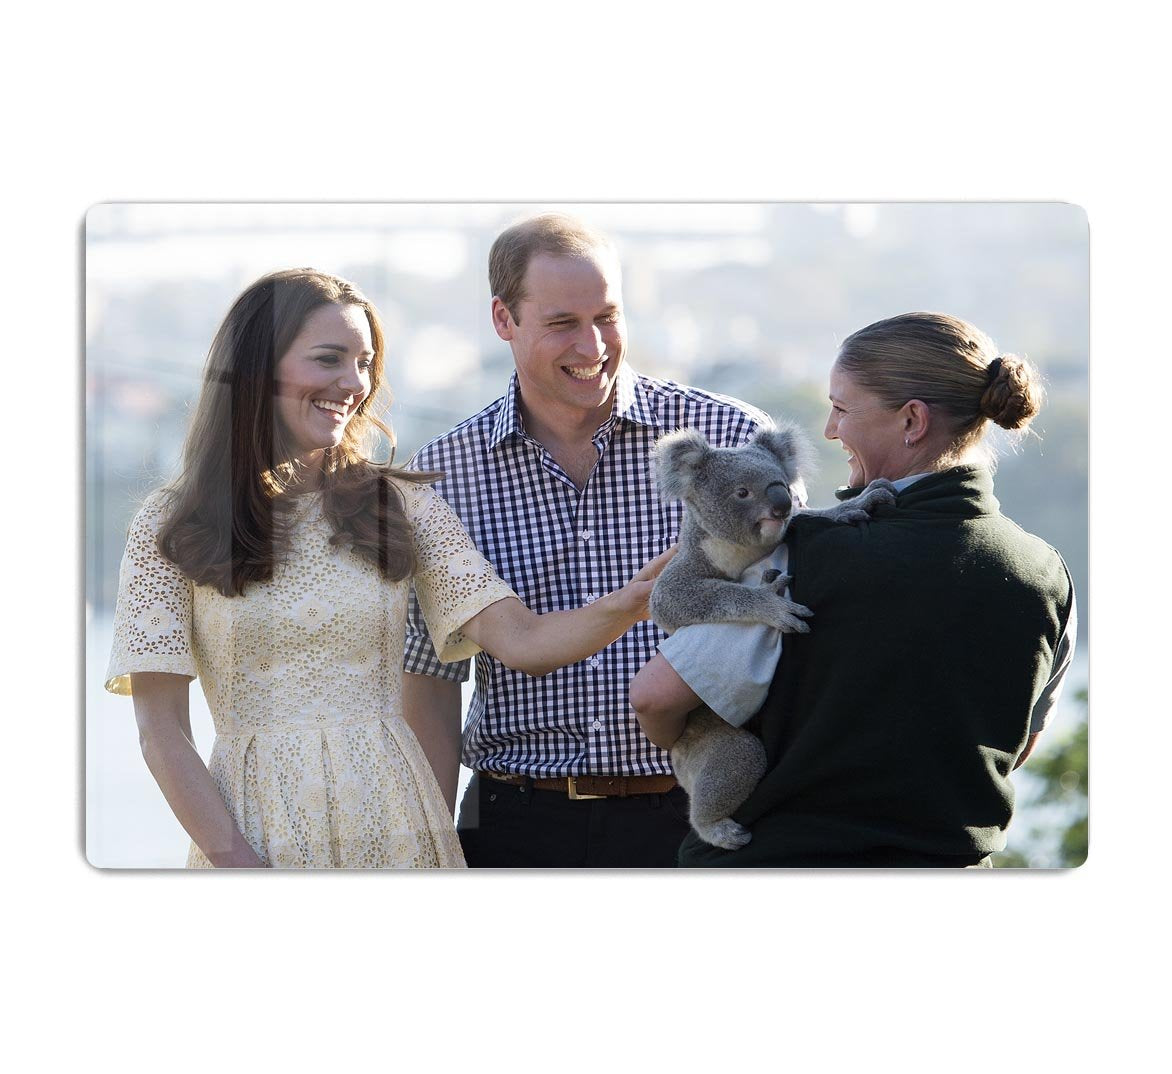 Prince William and Kate with a koala bear in Sydney Australia HD Metal Print